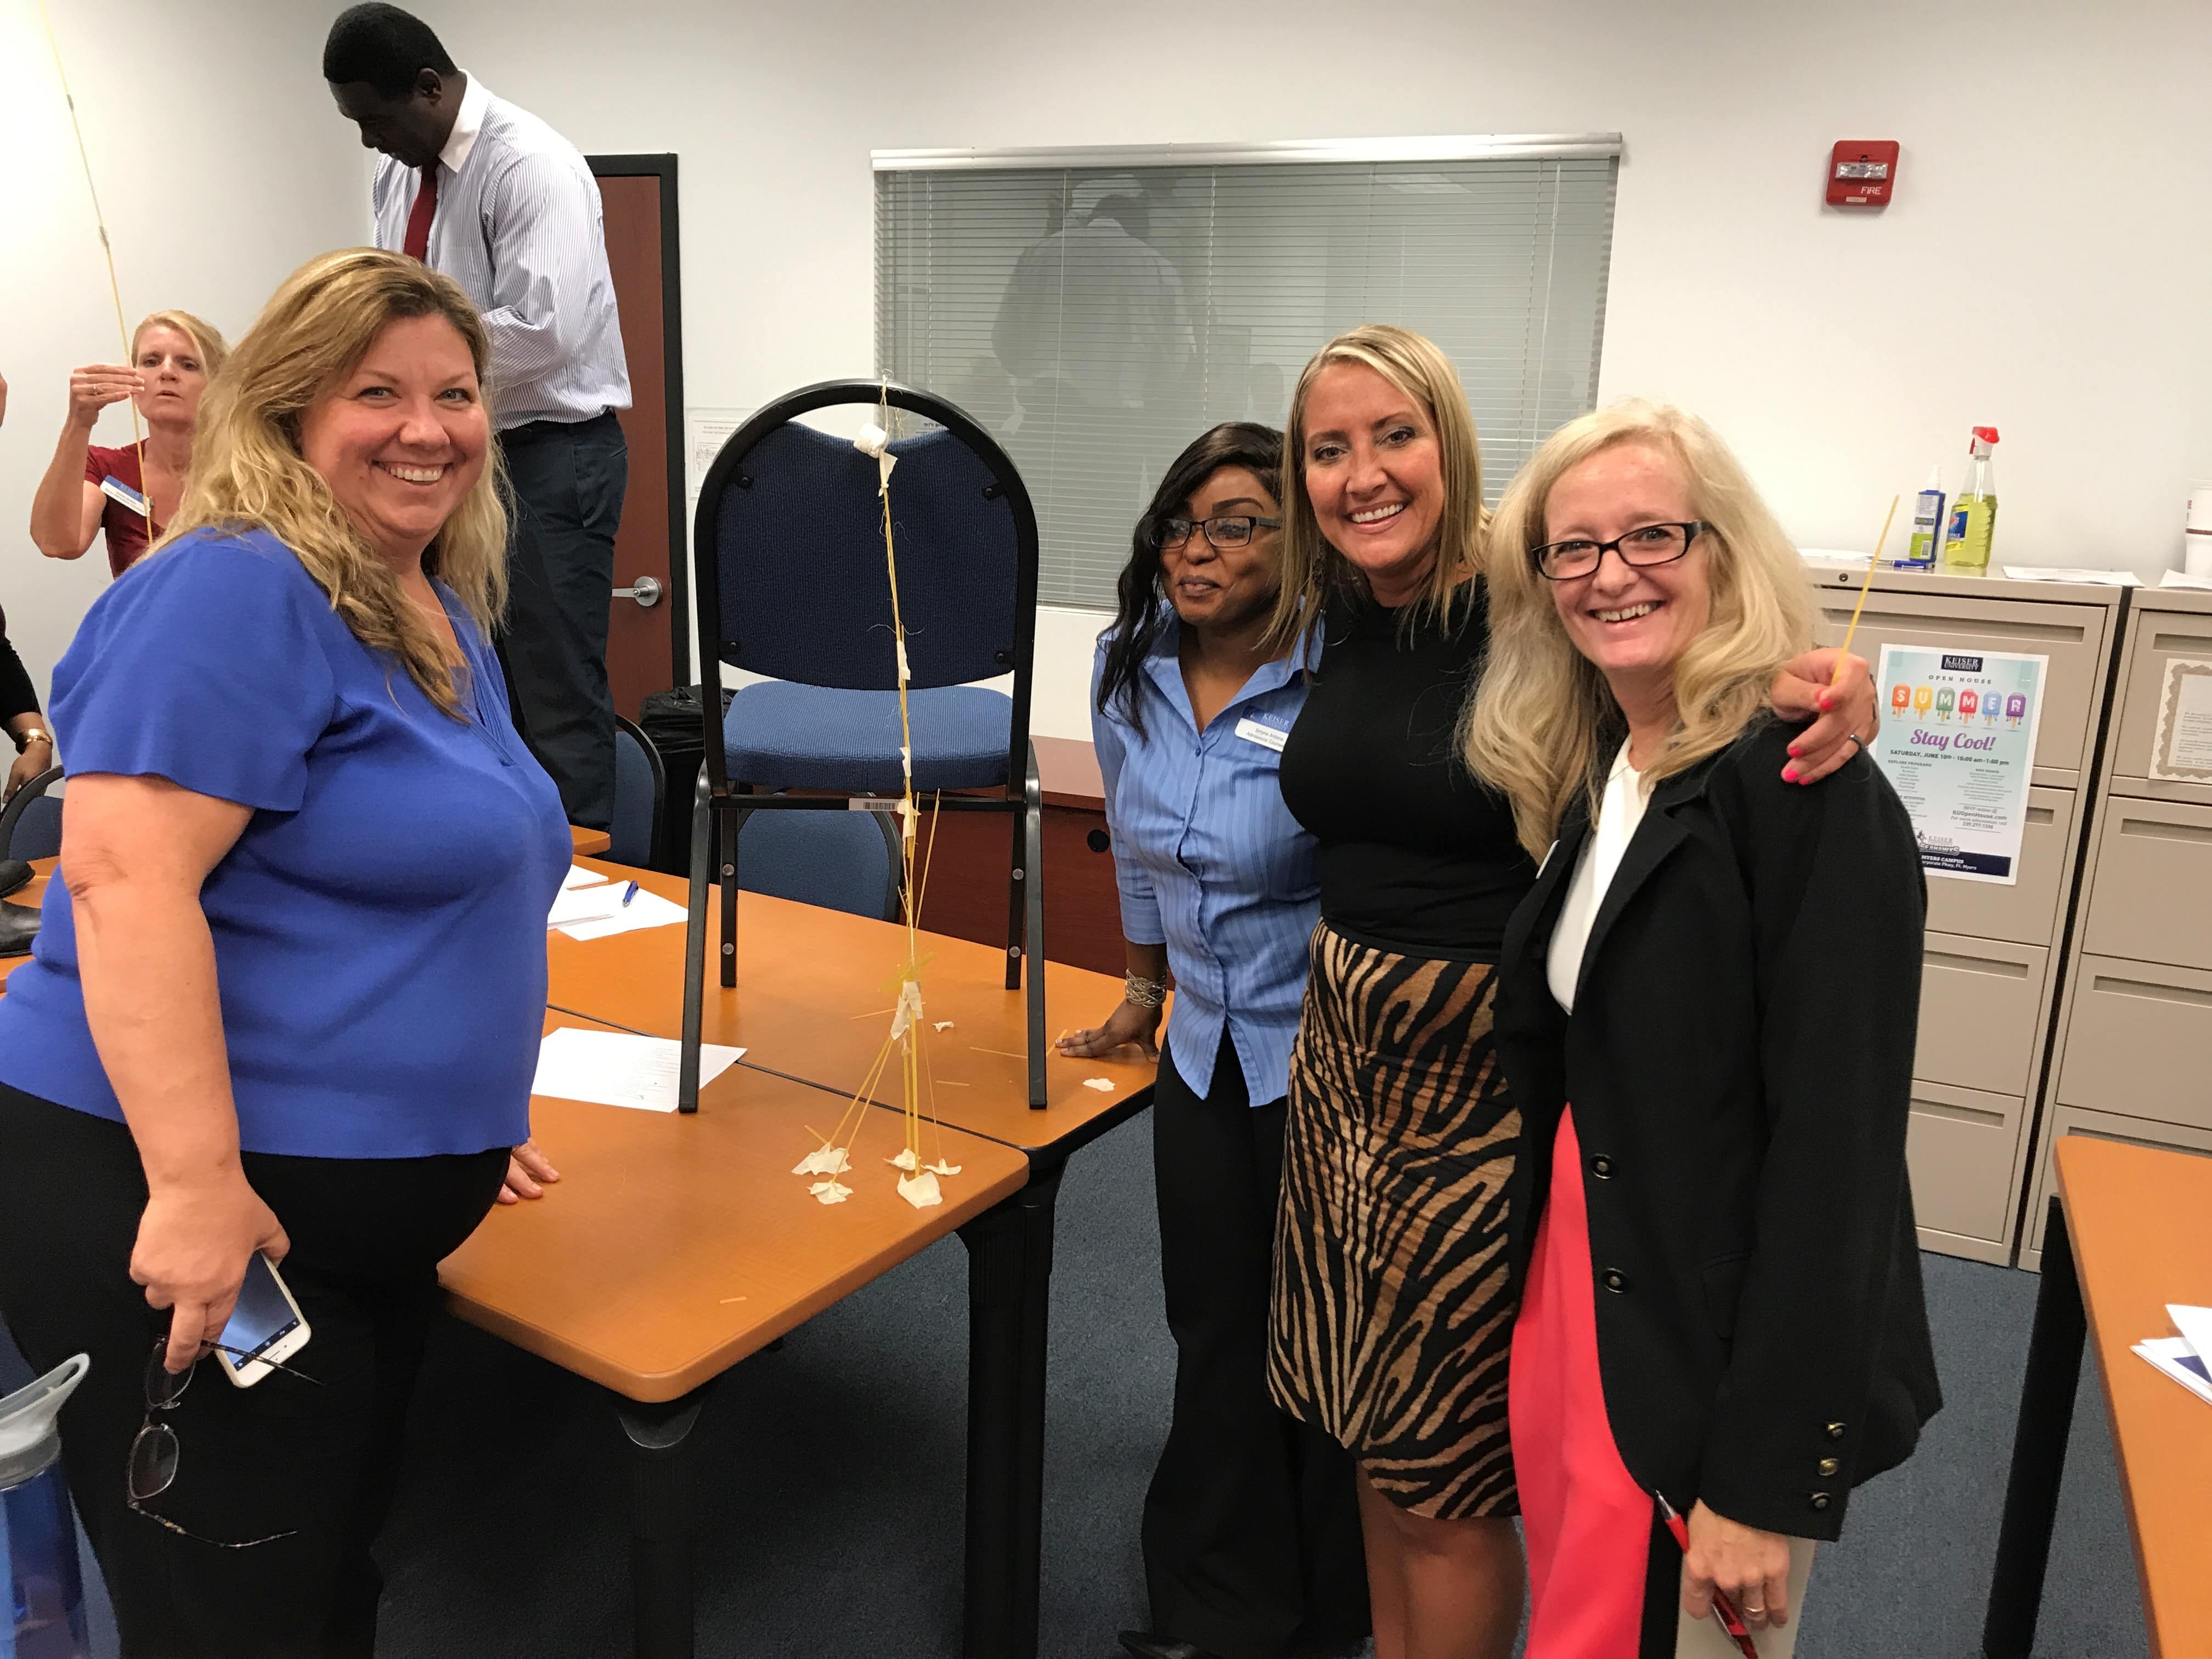 Teamwork Essential for Fort Myers Staff in Latest Team “Building” Challenge 